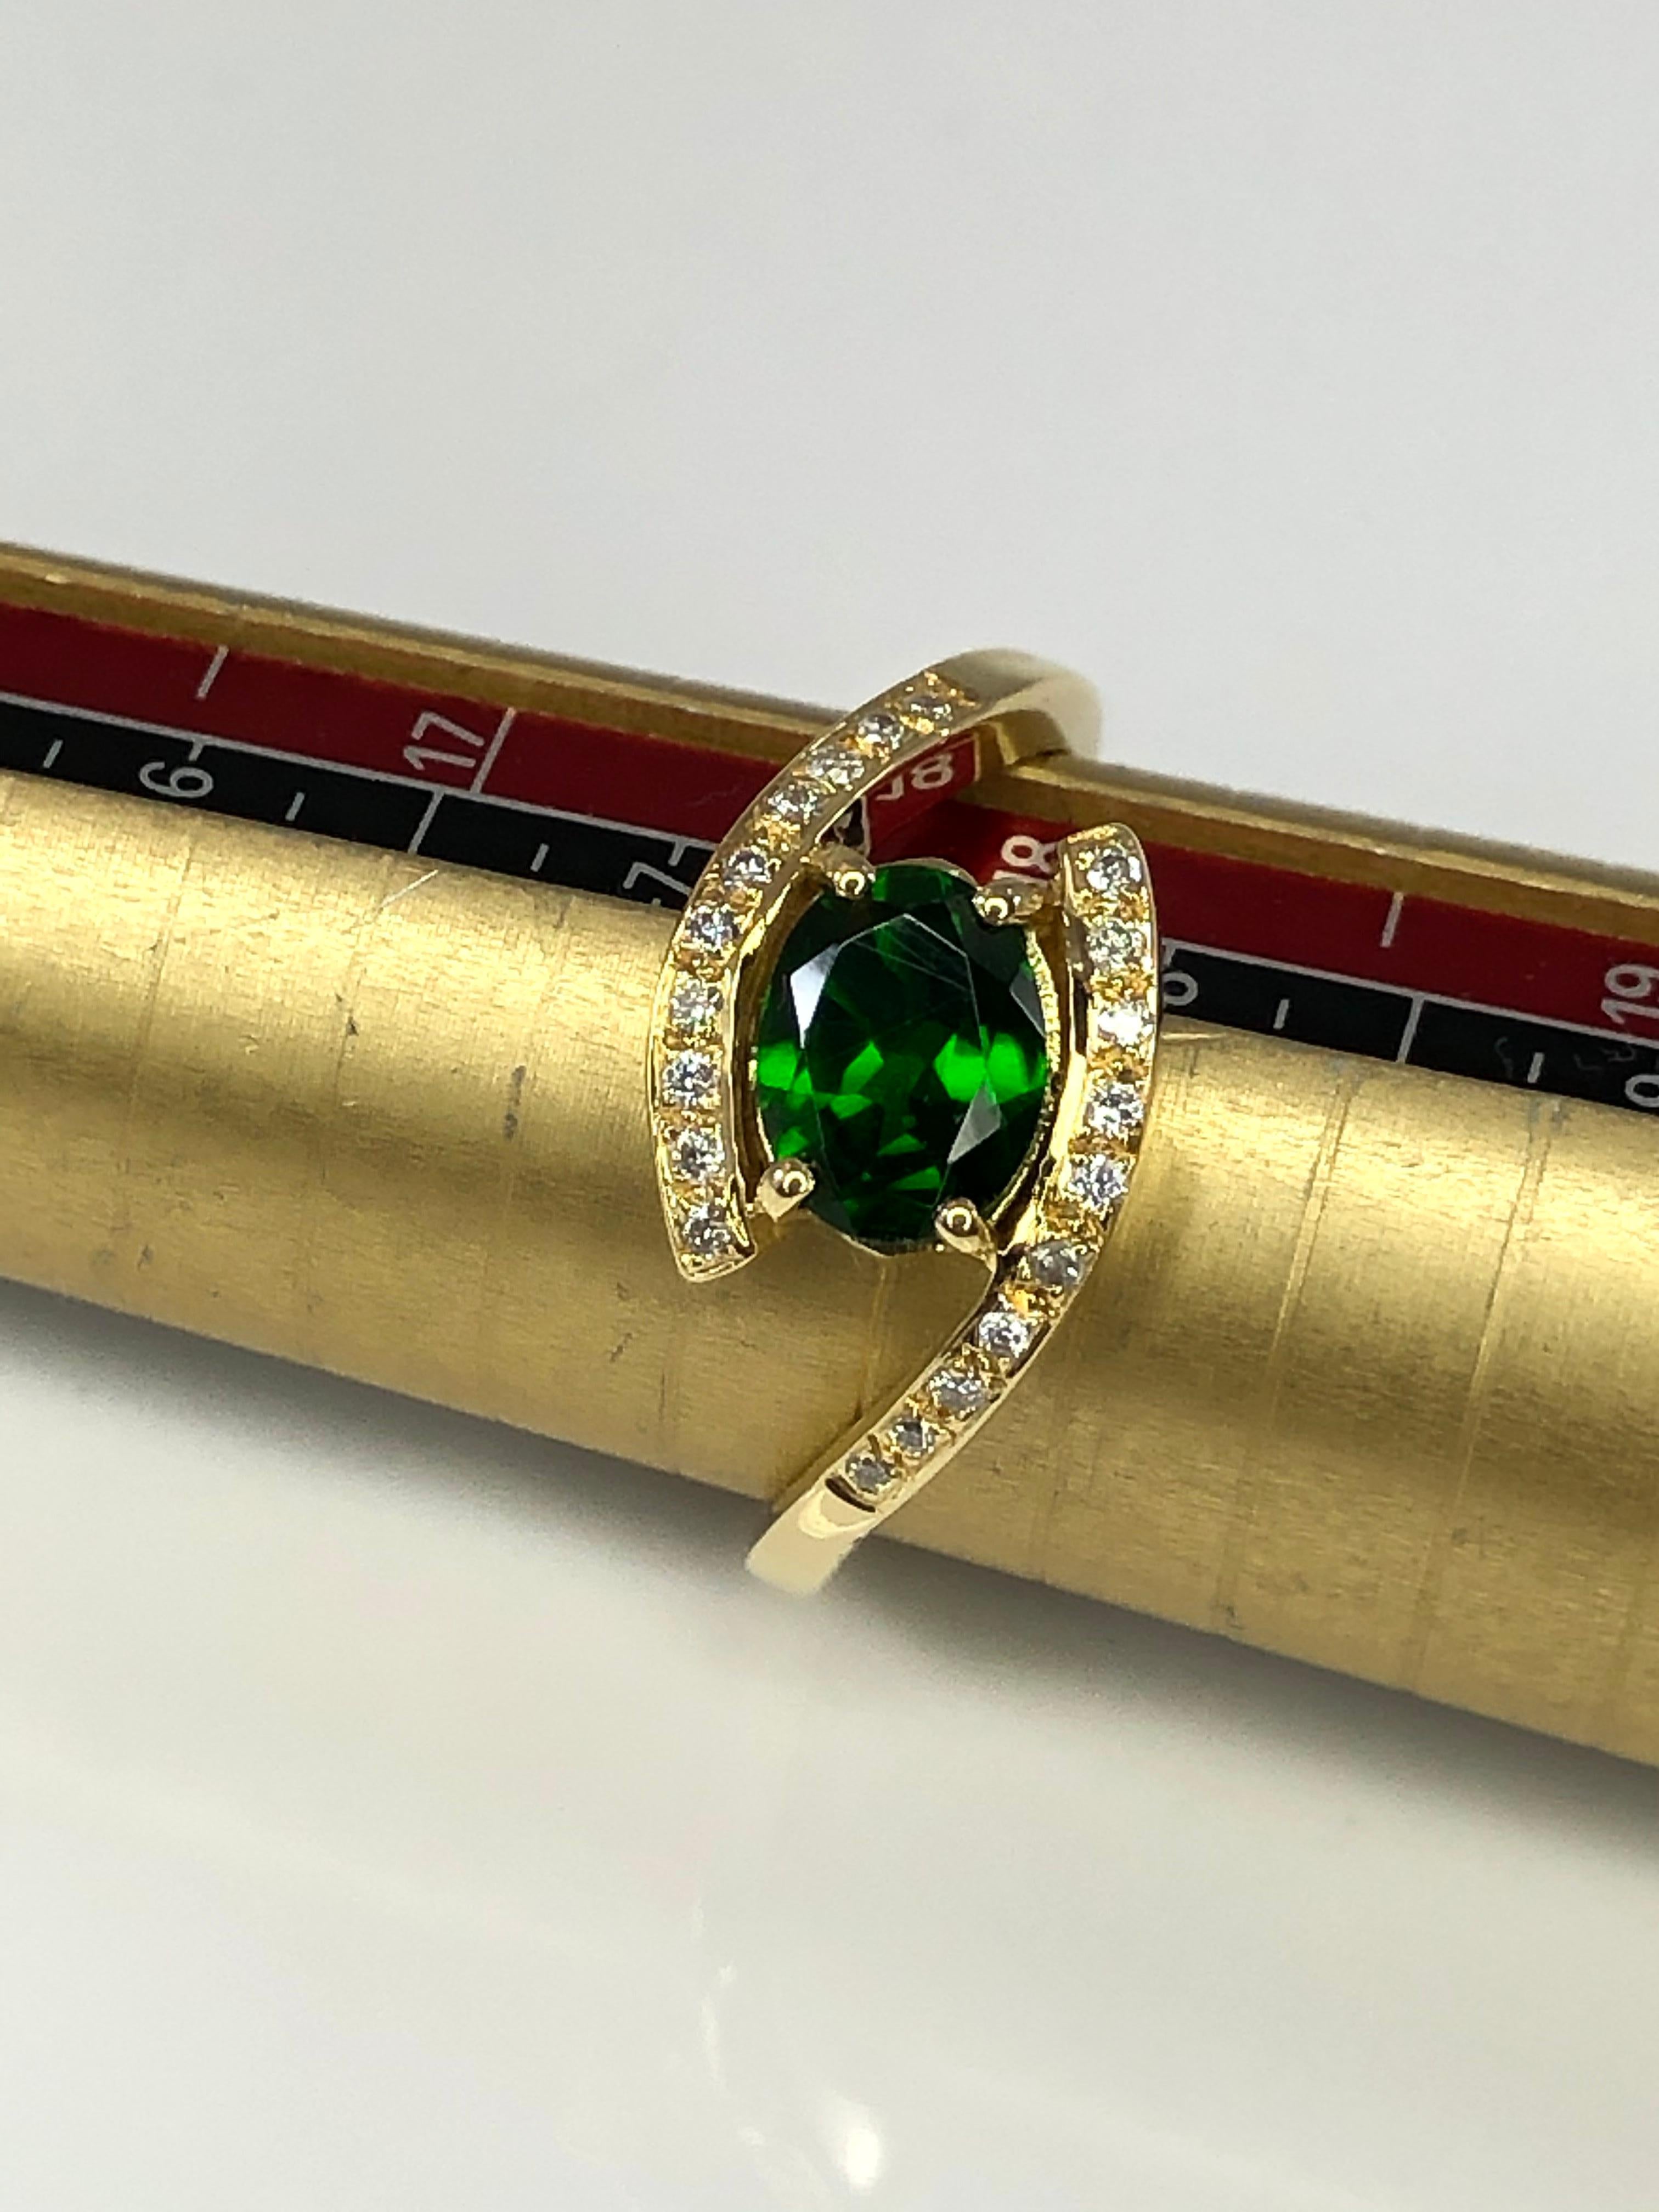 S.Georgios designer band ring is all handmade in our workshop in Greece from 18 Karat Yellow Gold. The beautiful ring features a 1.21 Carat oval cut natural Tsavorite center and 0.12 Carat brilliant cut White Diamond decoration.
This design can also